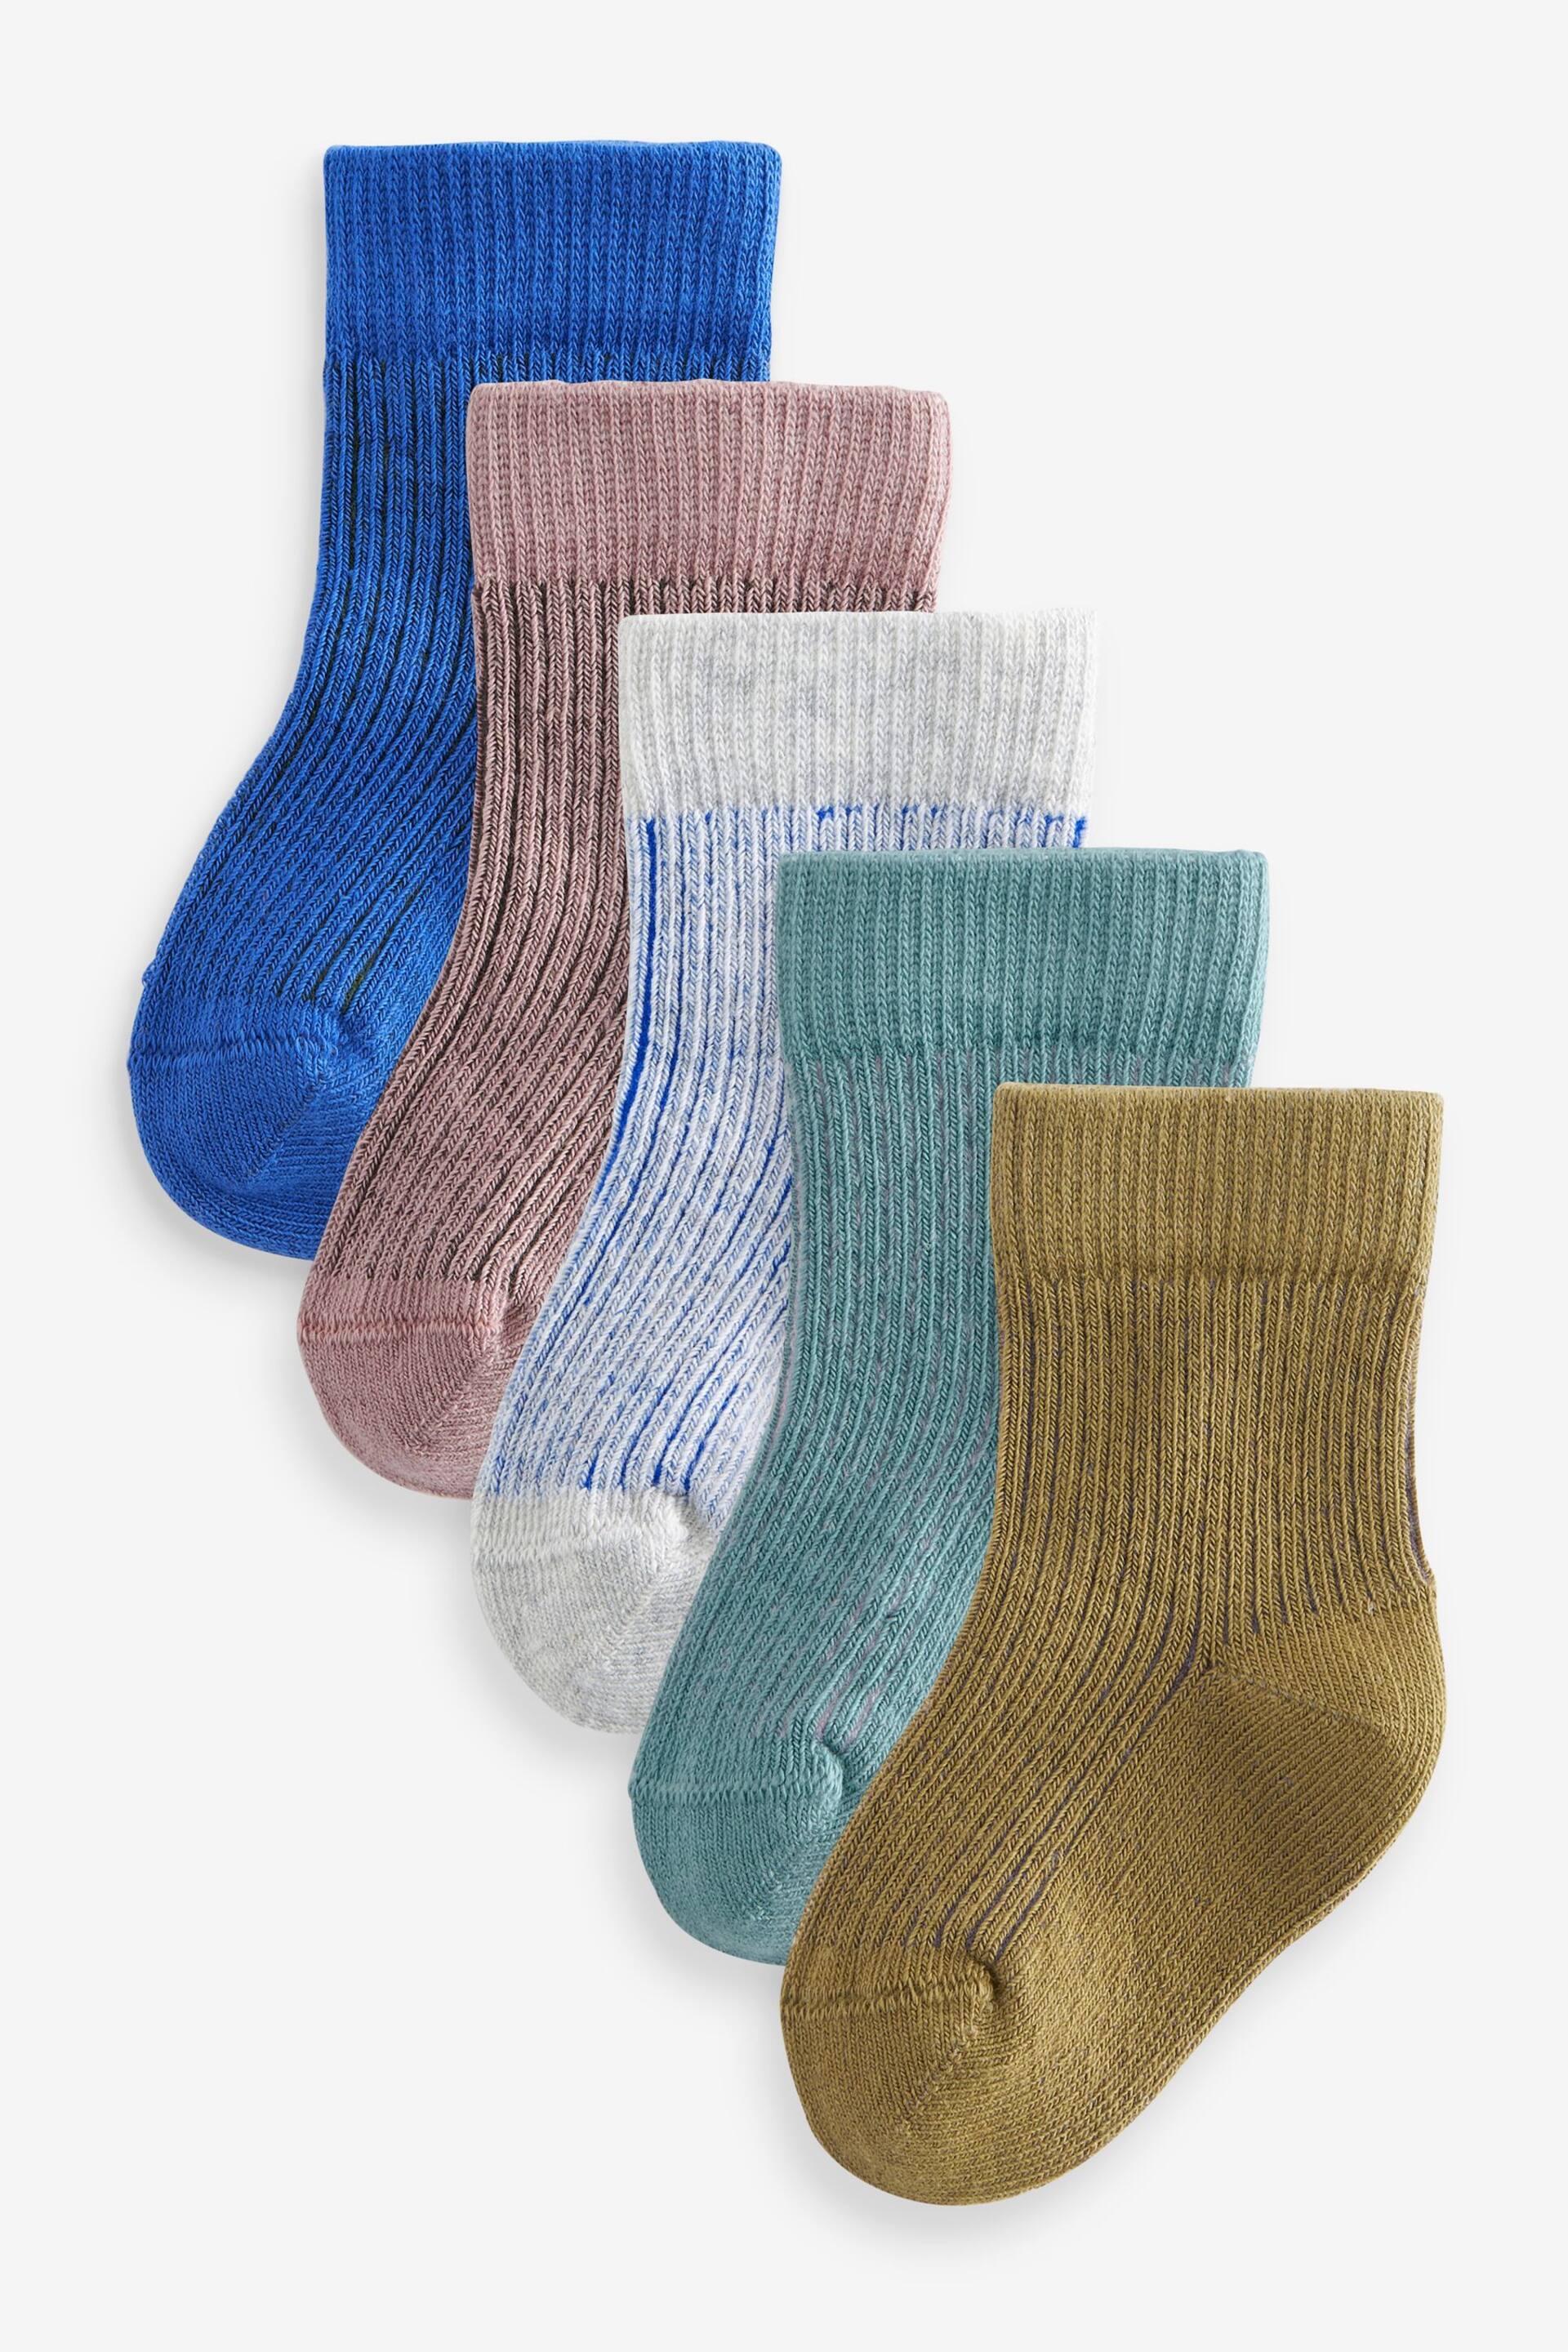 Blue Baby Socks 5 Pack (0mths-2yrs) - Image 1 of 6